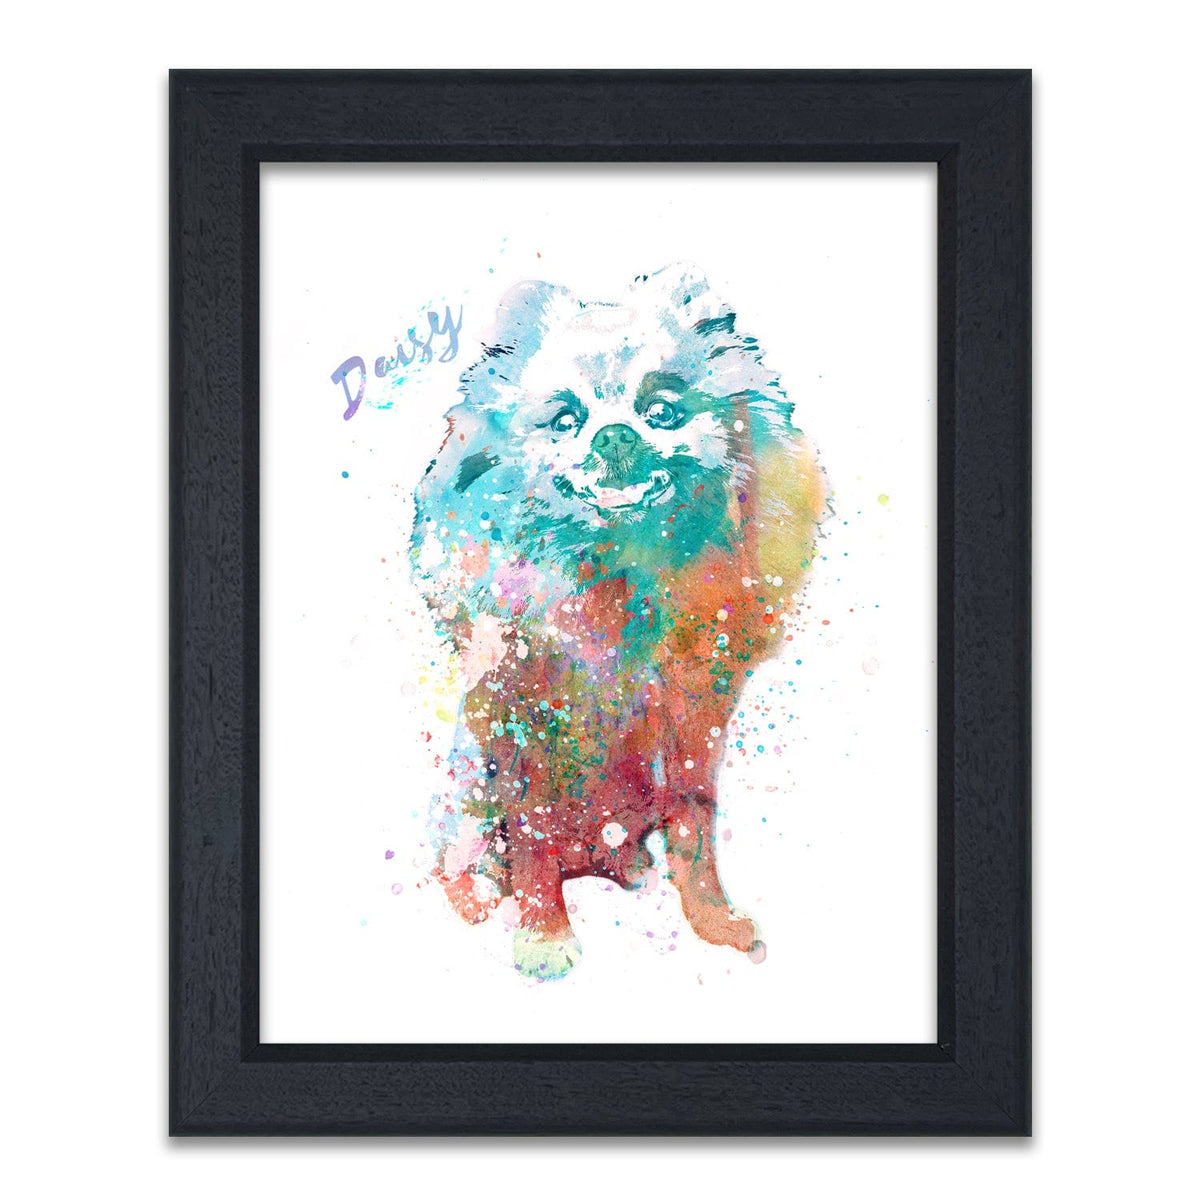 Framed Pomeranian Art - Personalized Pet Gift from Personal-Prints